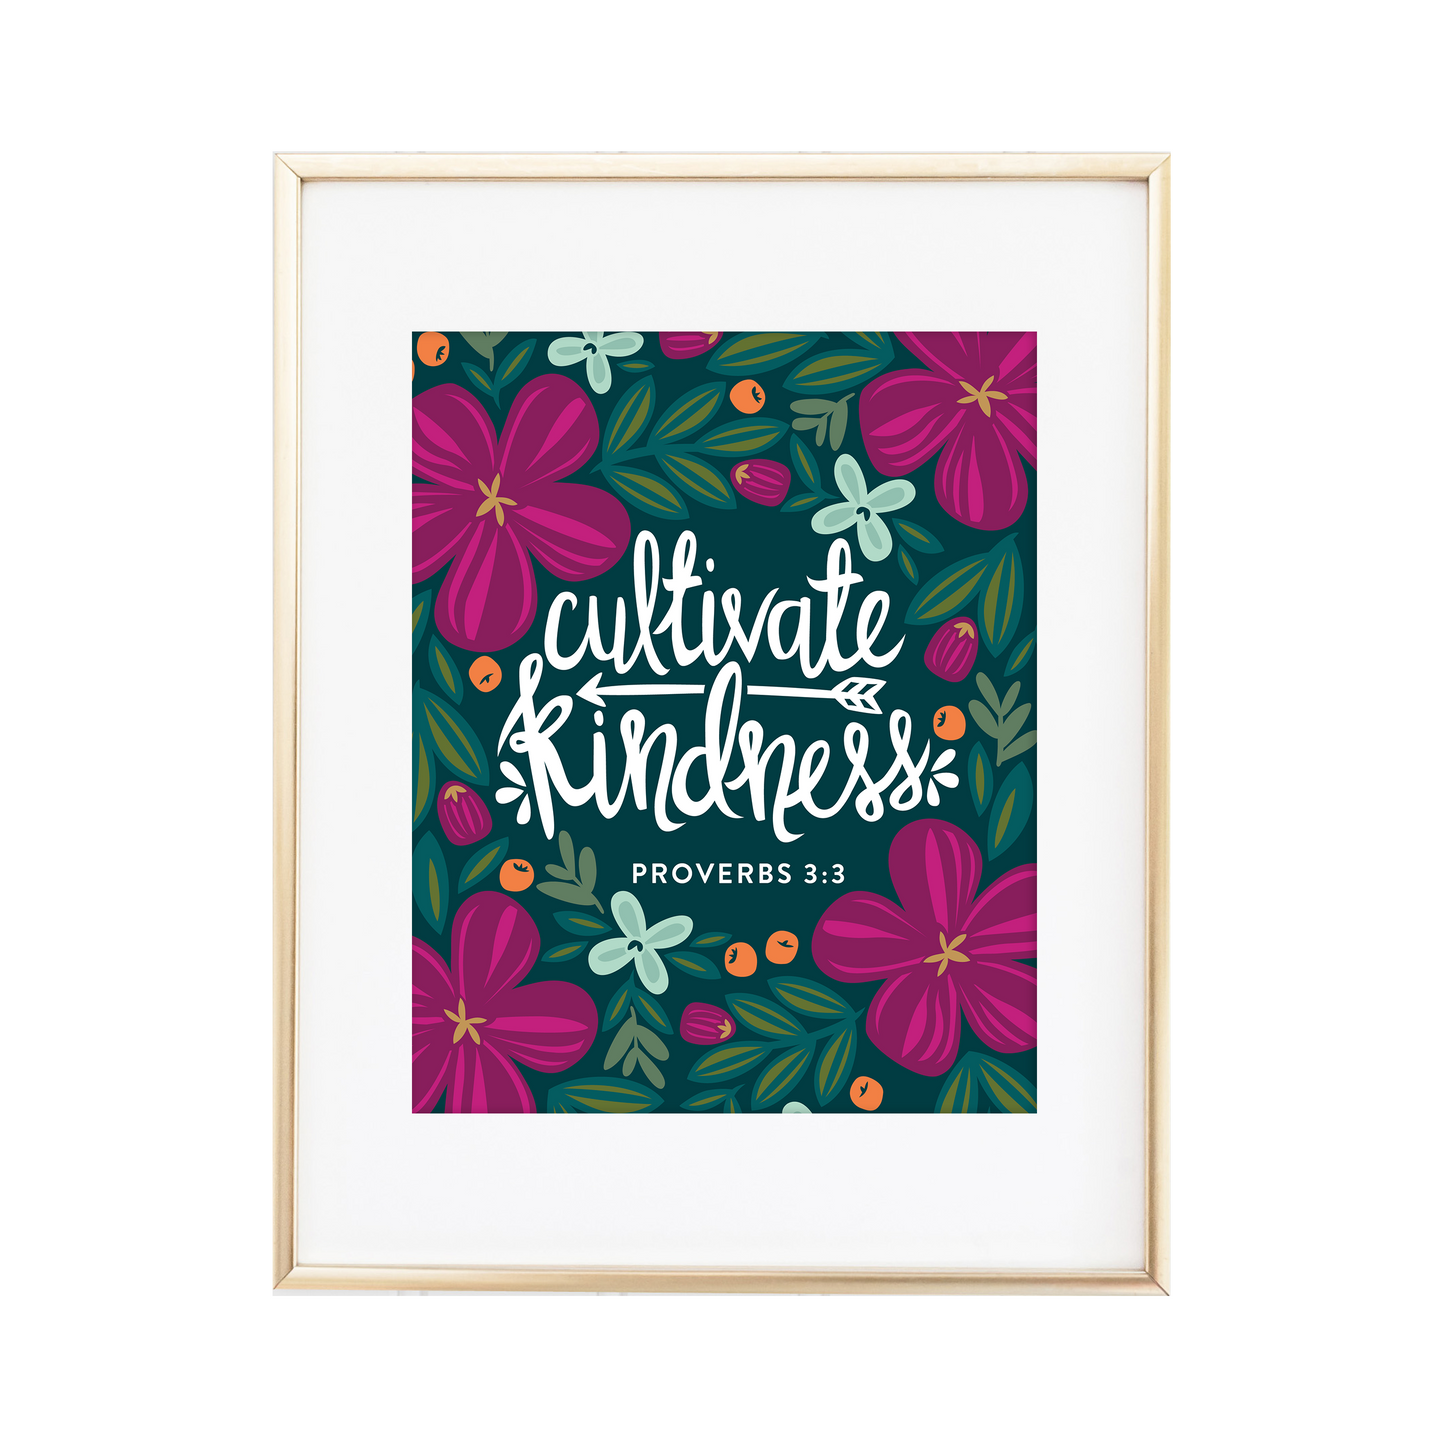 Cultivate Kindness - Proverbs 3:3 Print